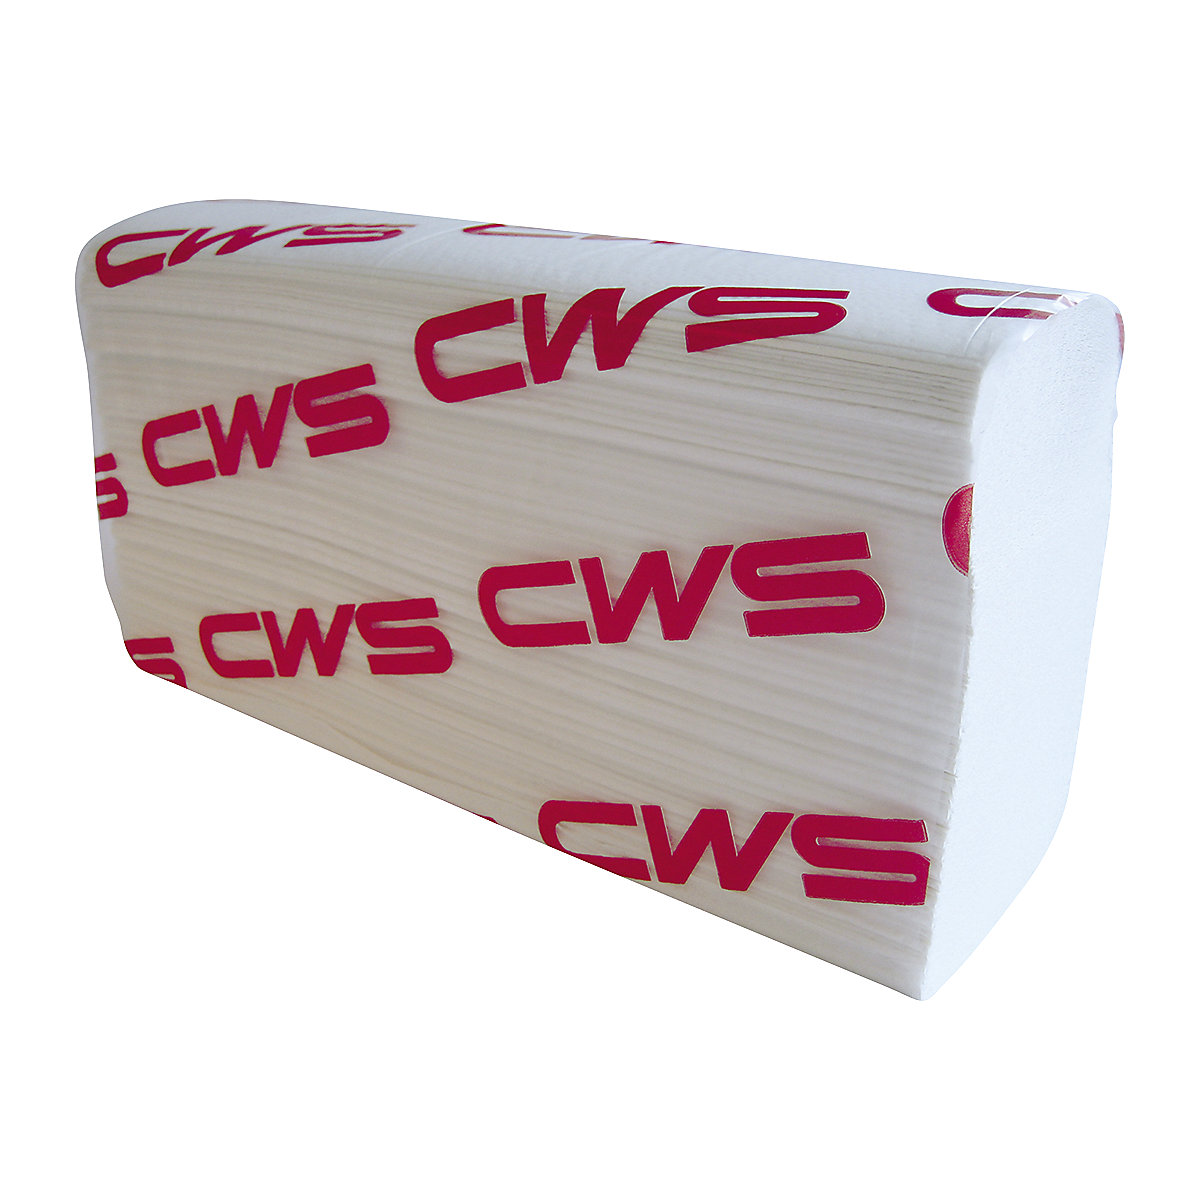 Multifold folded paper towel – CWS